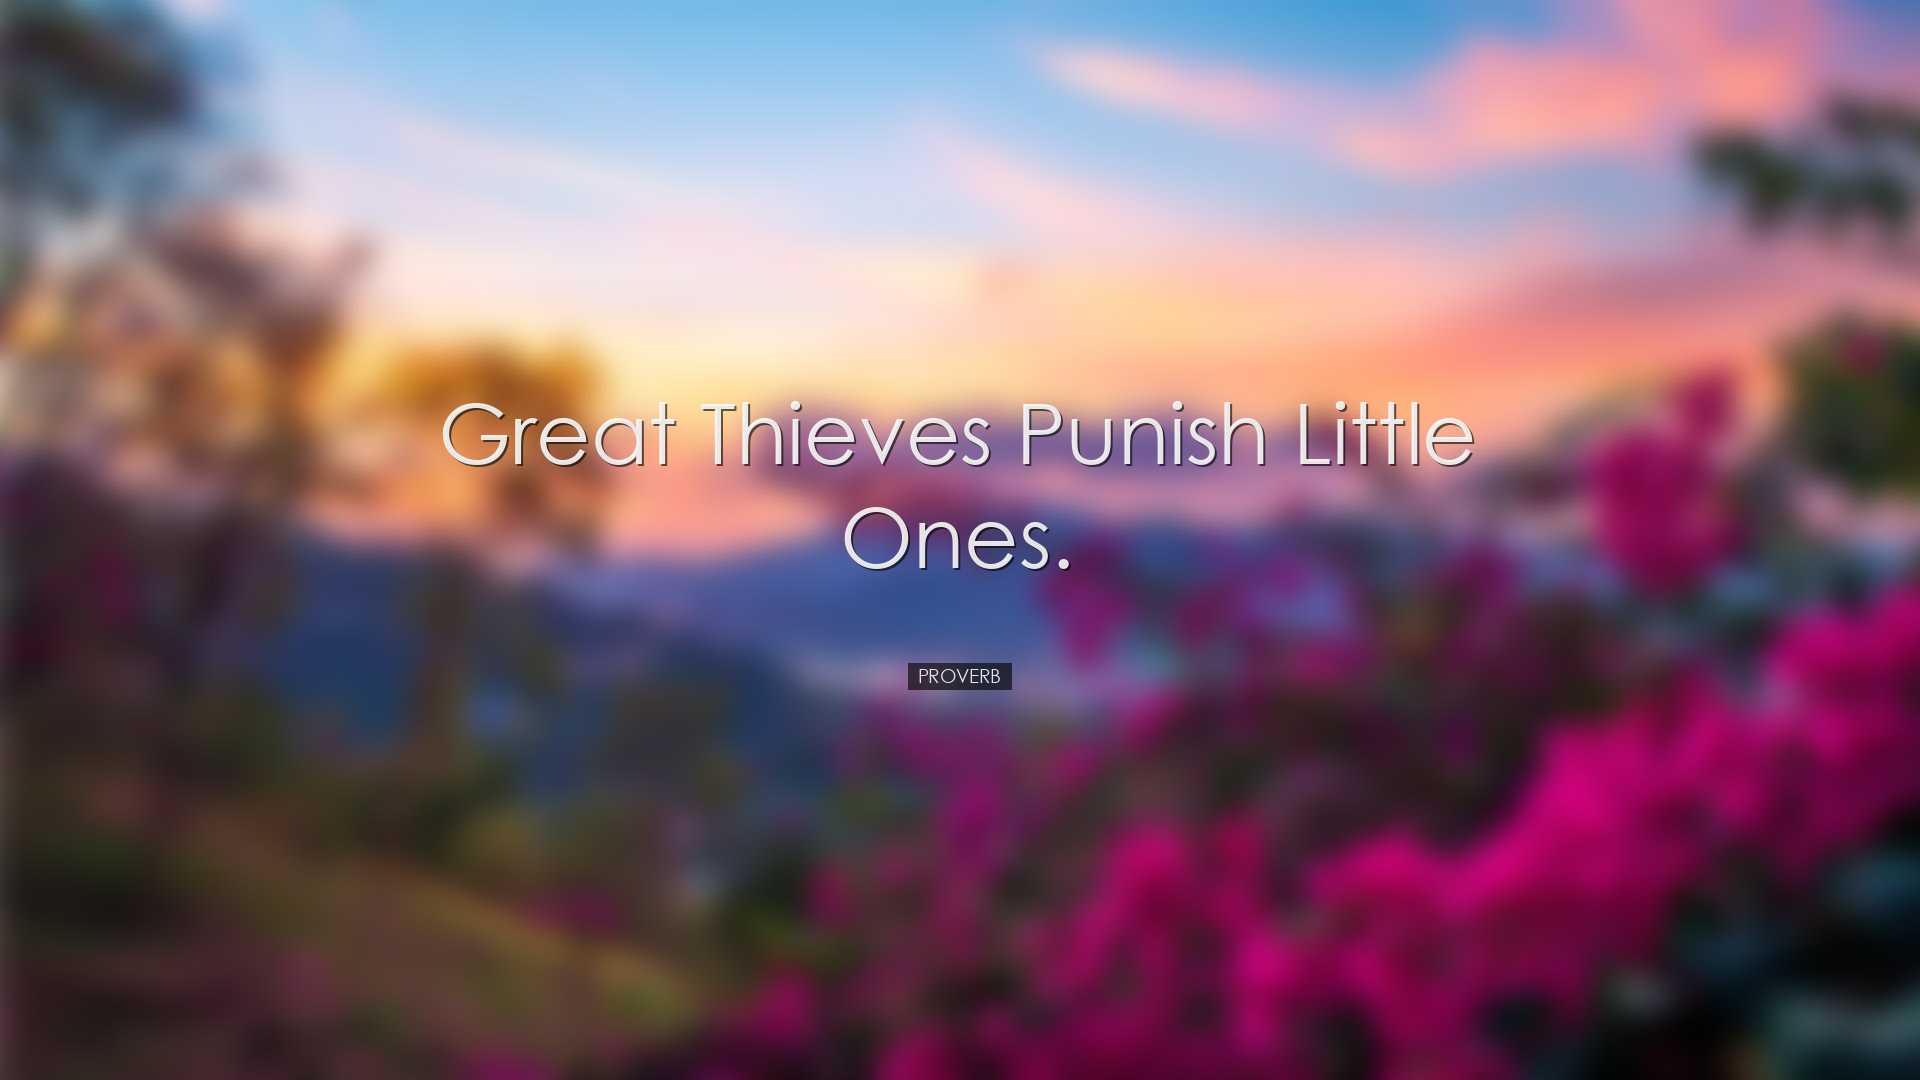 Great thieves punish little ones. - Proverb